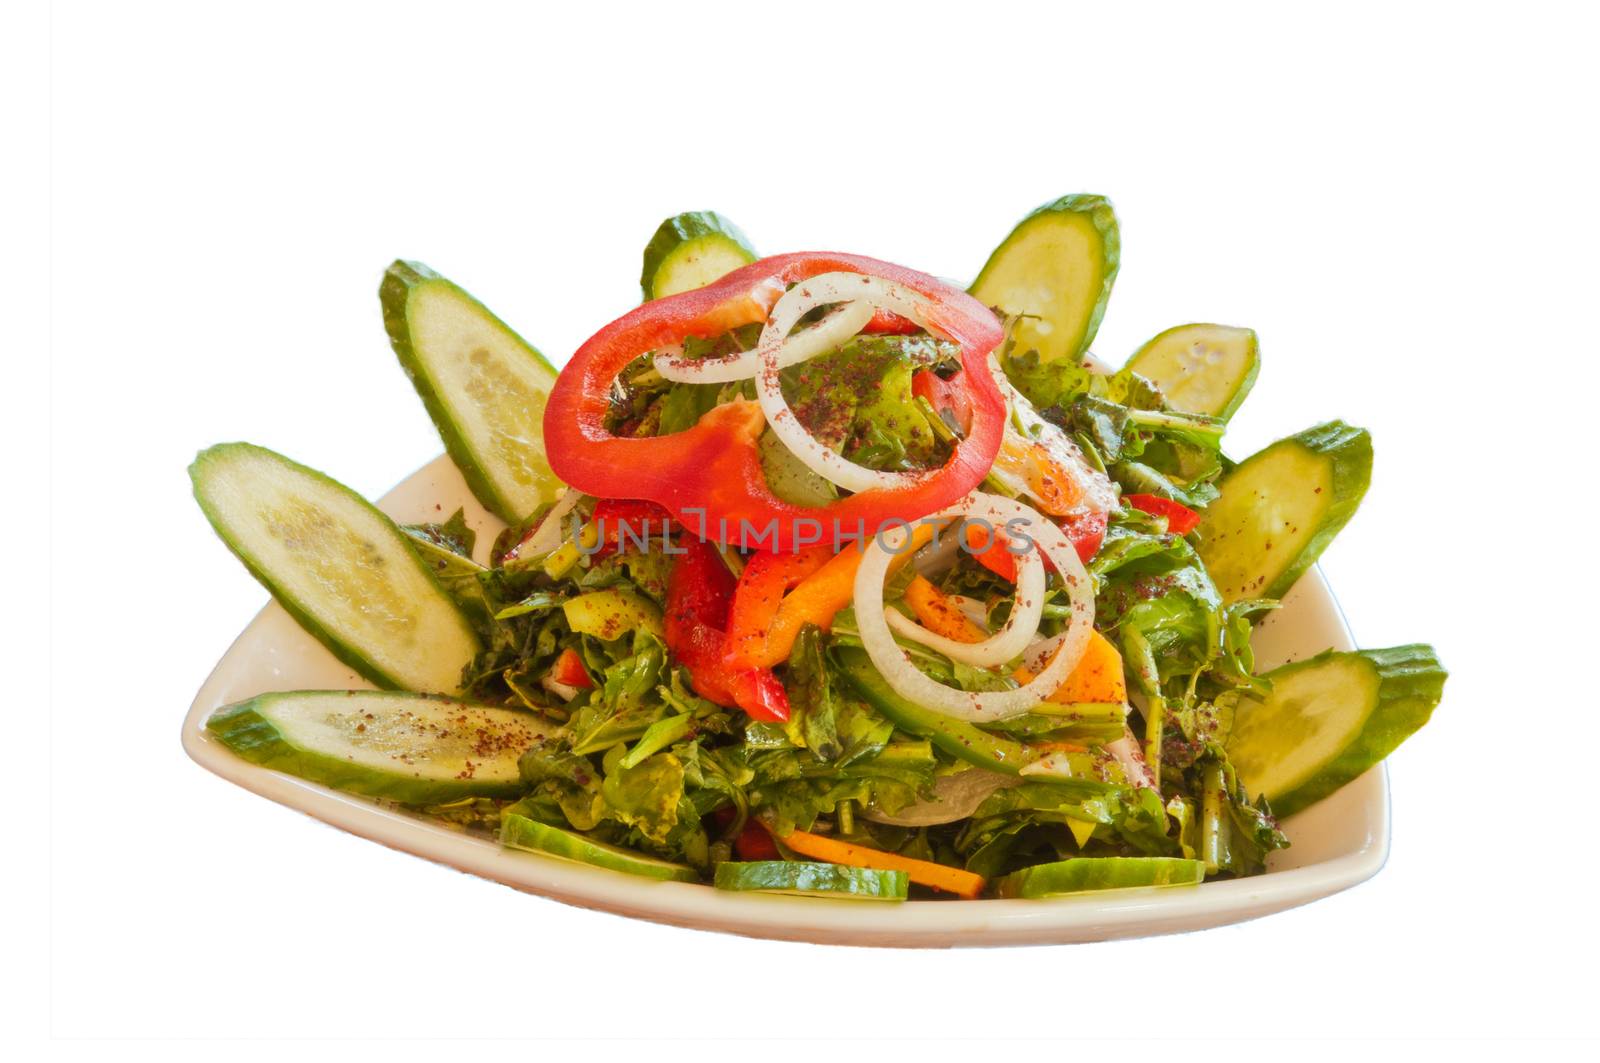 Salad greens and cucumbers garnished with onion rings and Bulgarian red pepper